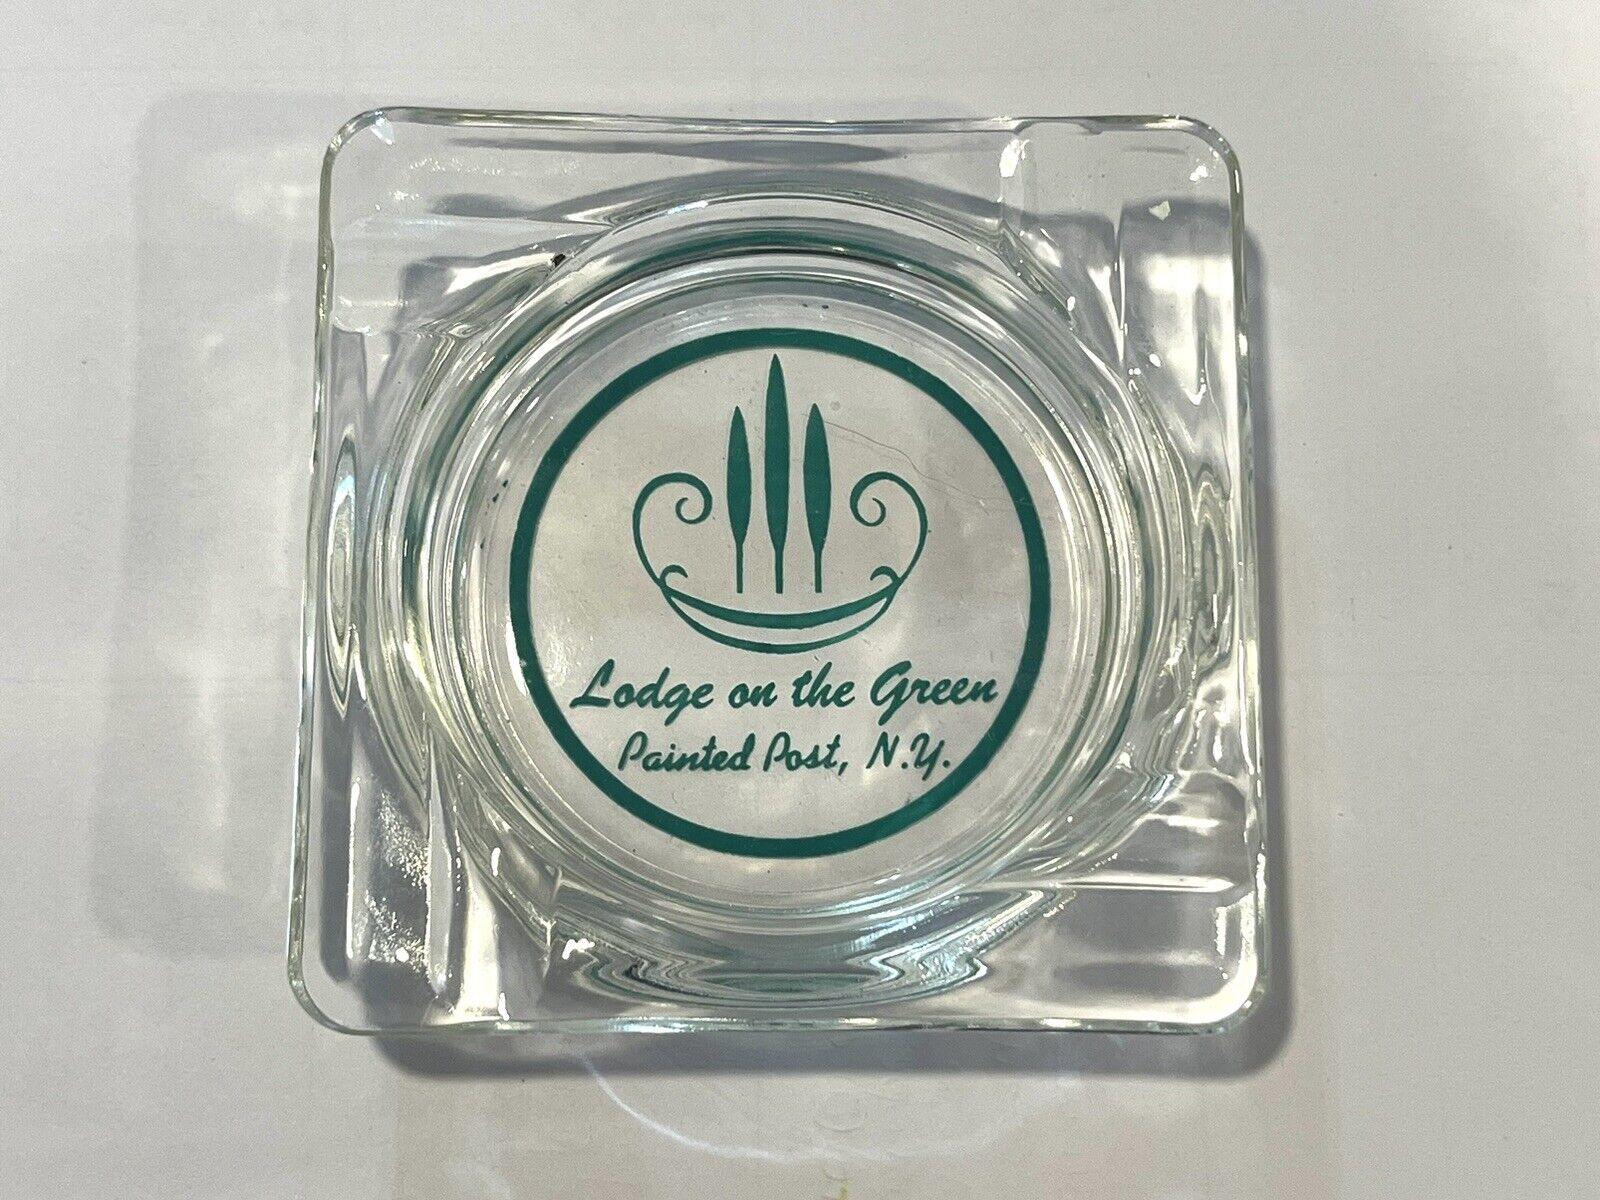 Vintage Lodge On The Green Painted Post, New York  Square Glass Ashtray